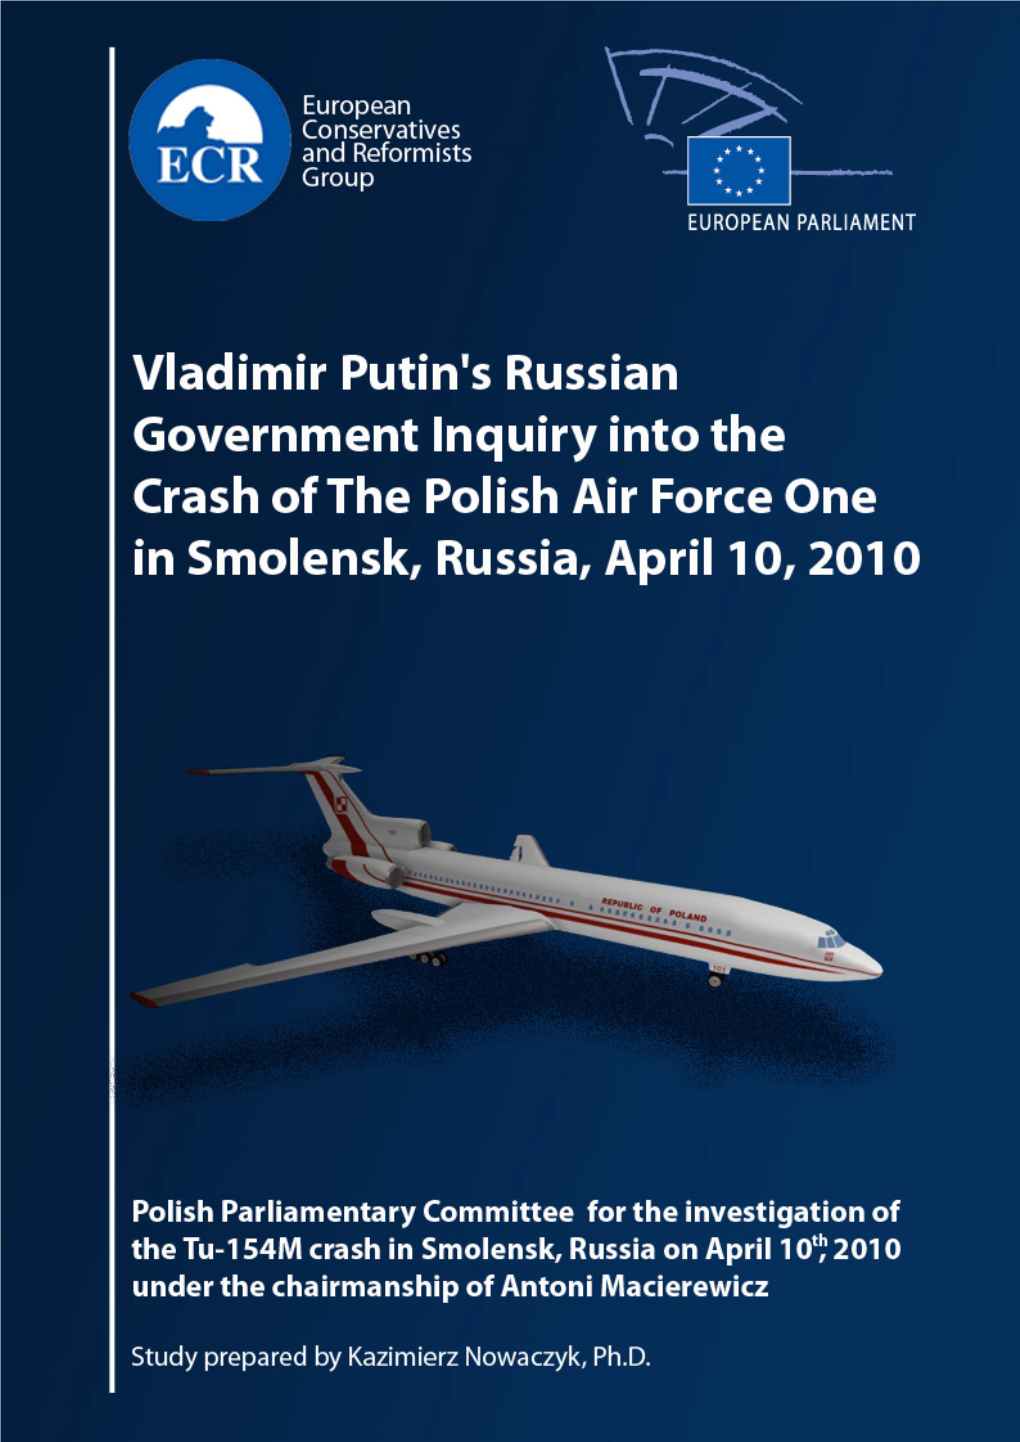 Vladimir Putin's Russian Government Inquiry Into the CRASH of the POLISH AIR FORCE Onein SMOLENSK, RUSSIA, APRIL 10, 2010